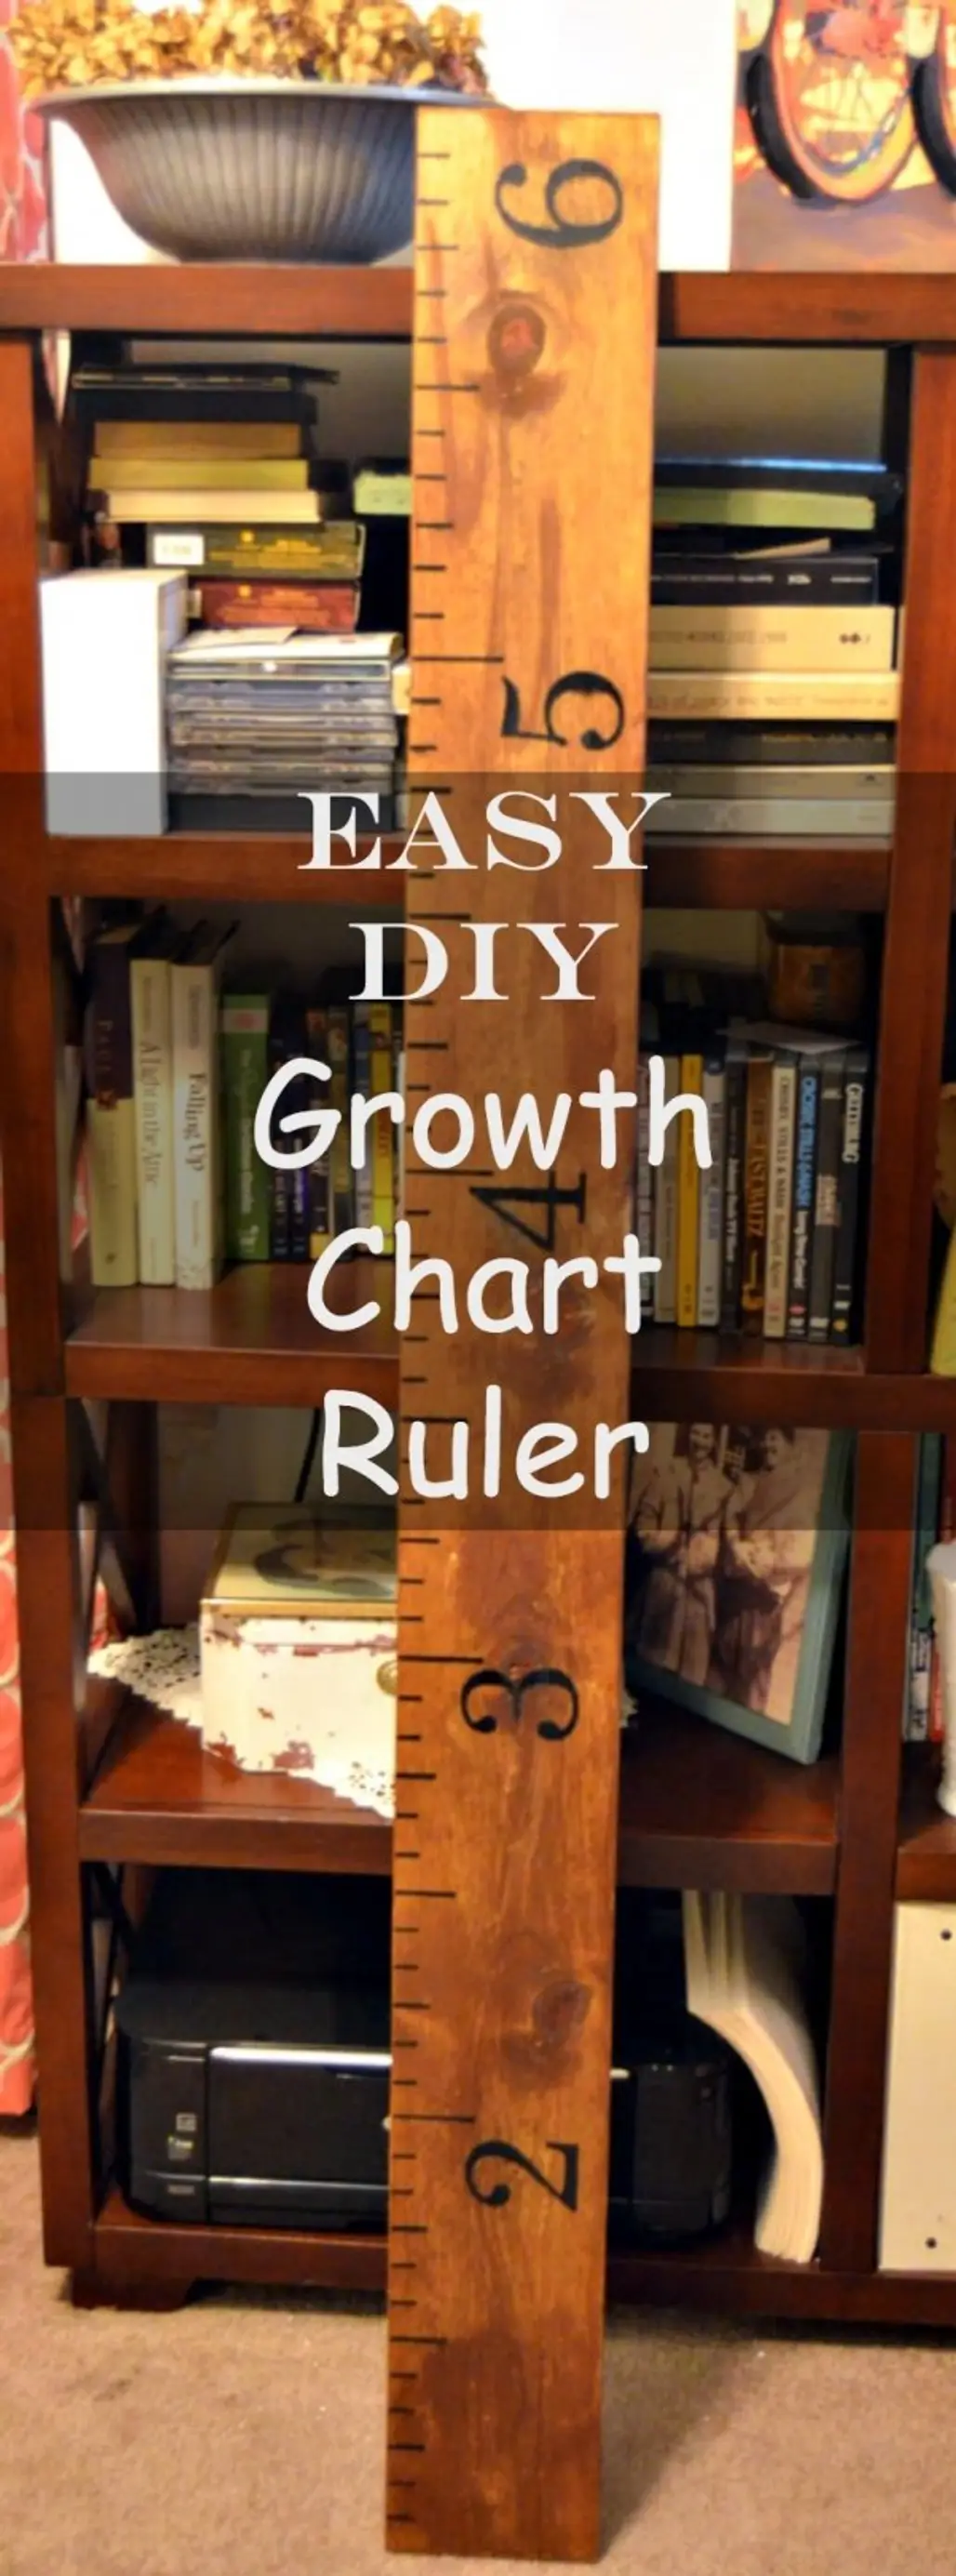 How to Make a Growth Chart Ruler